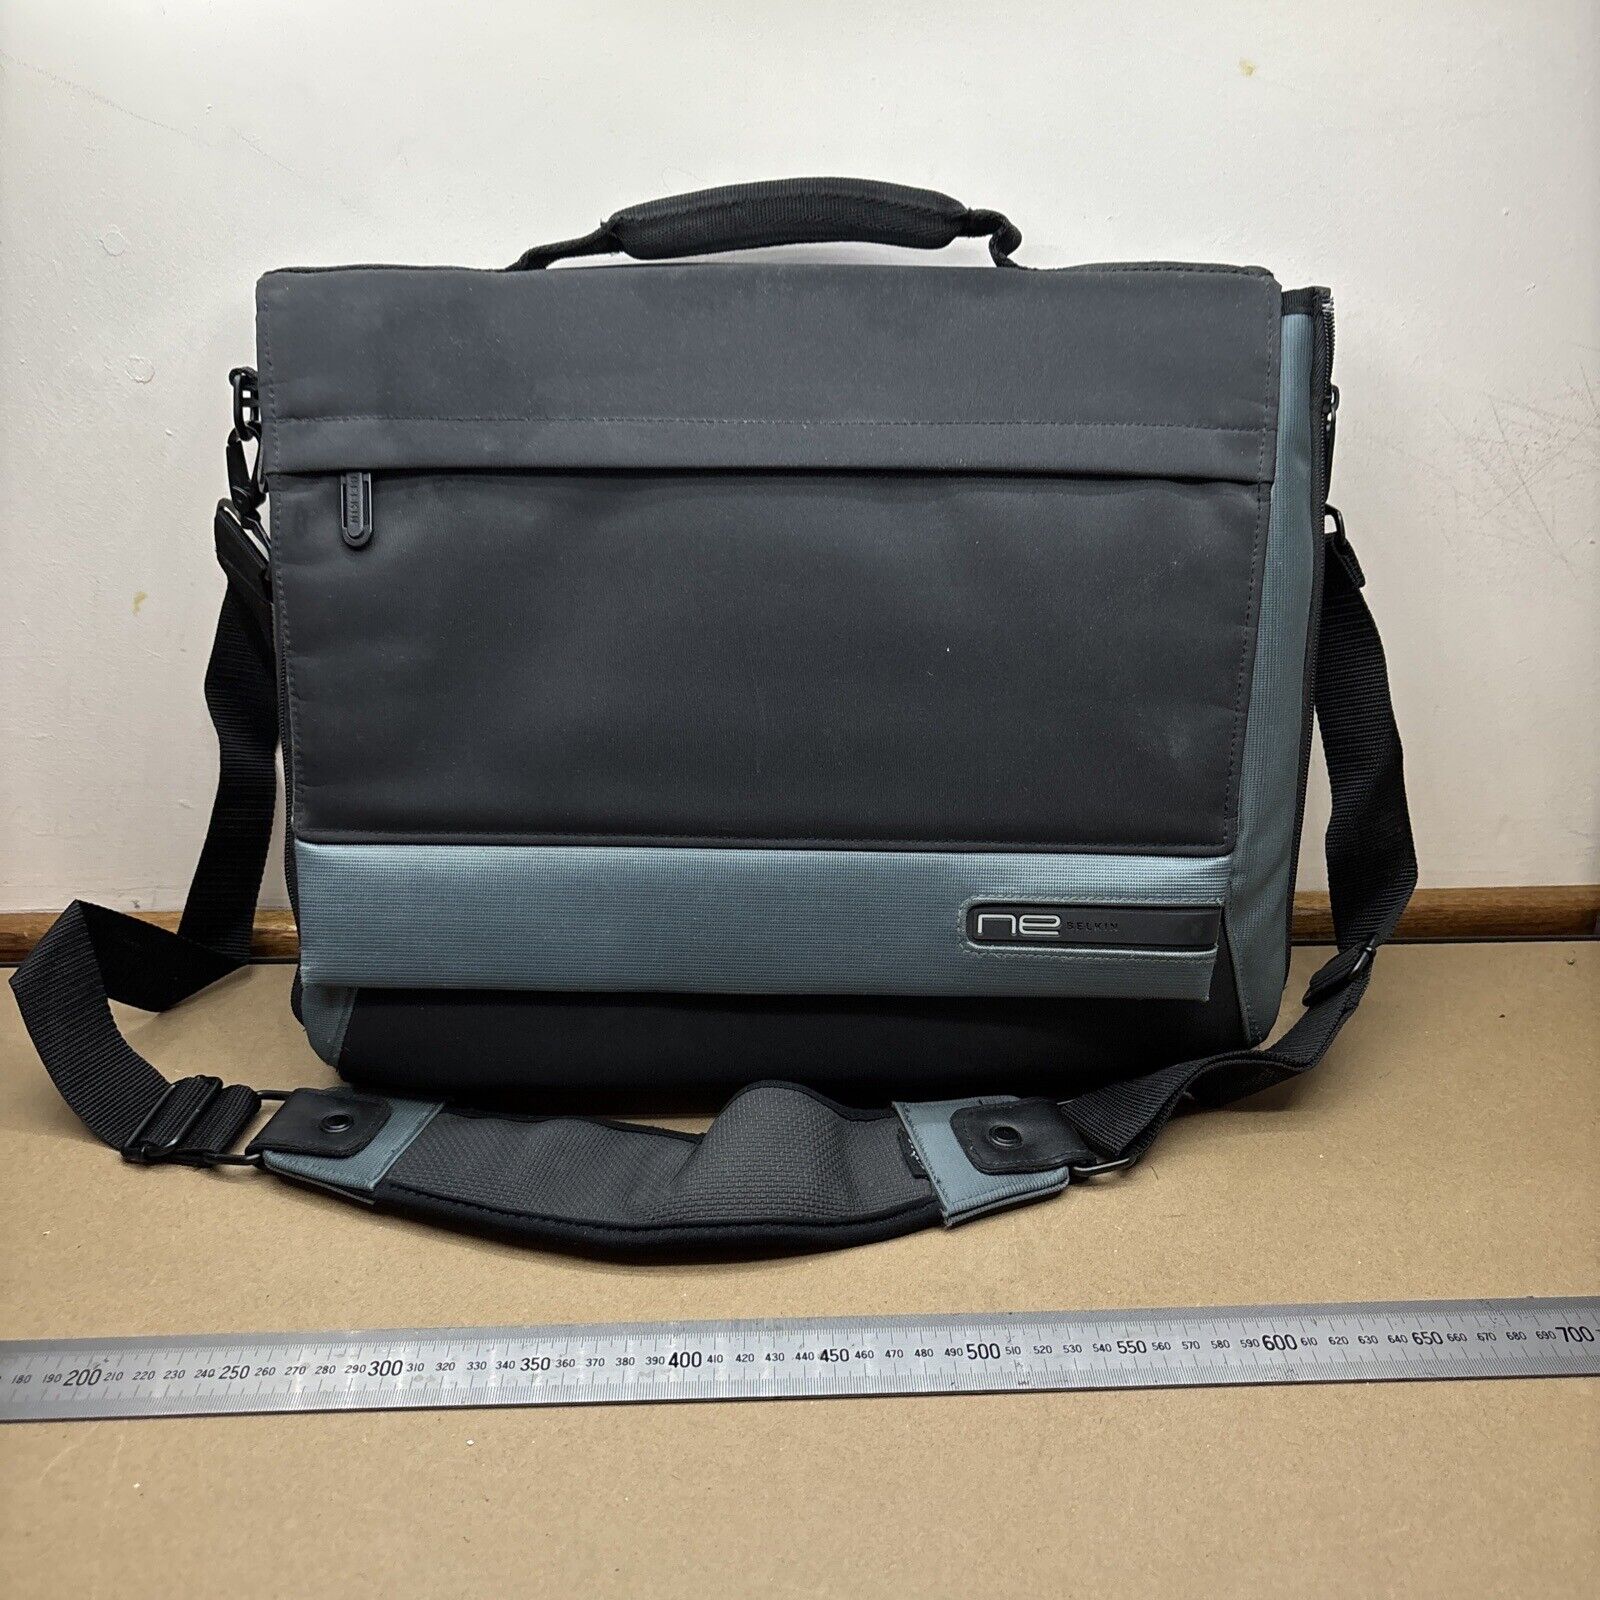 Belkin NE Laptop Notebook PC Bag With Thick Padded Multiple Compartments